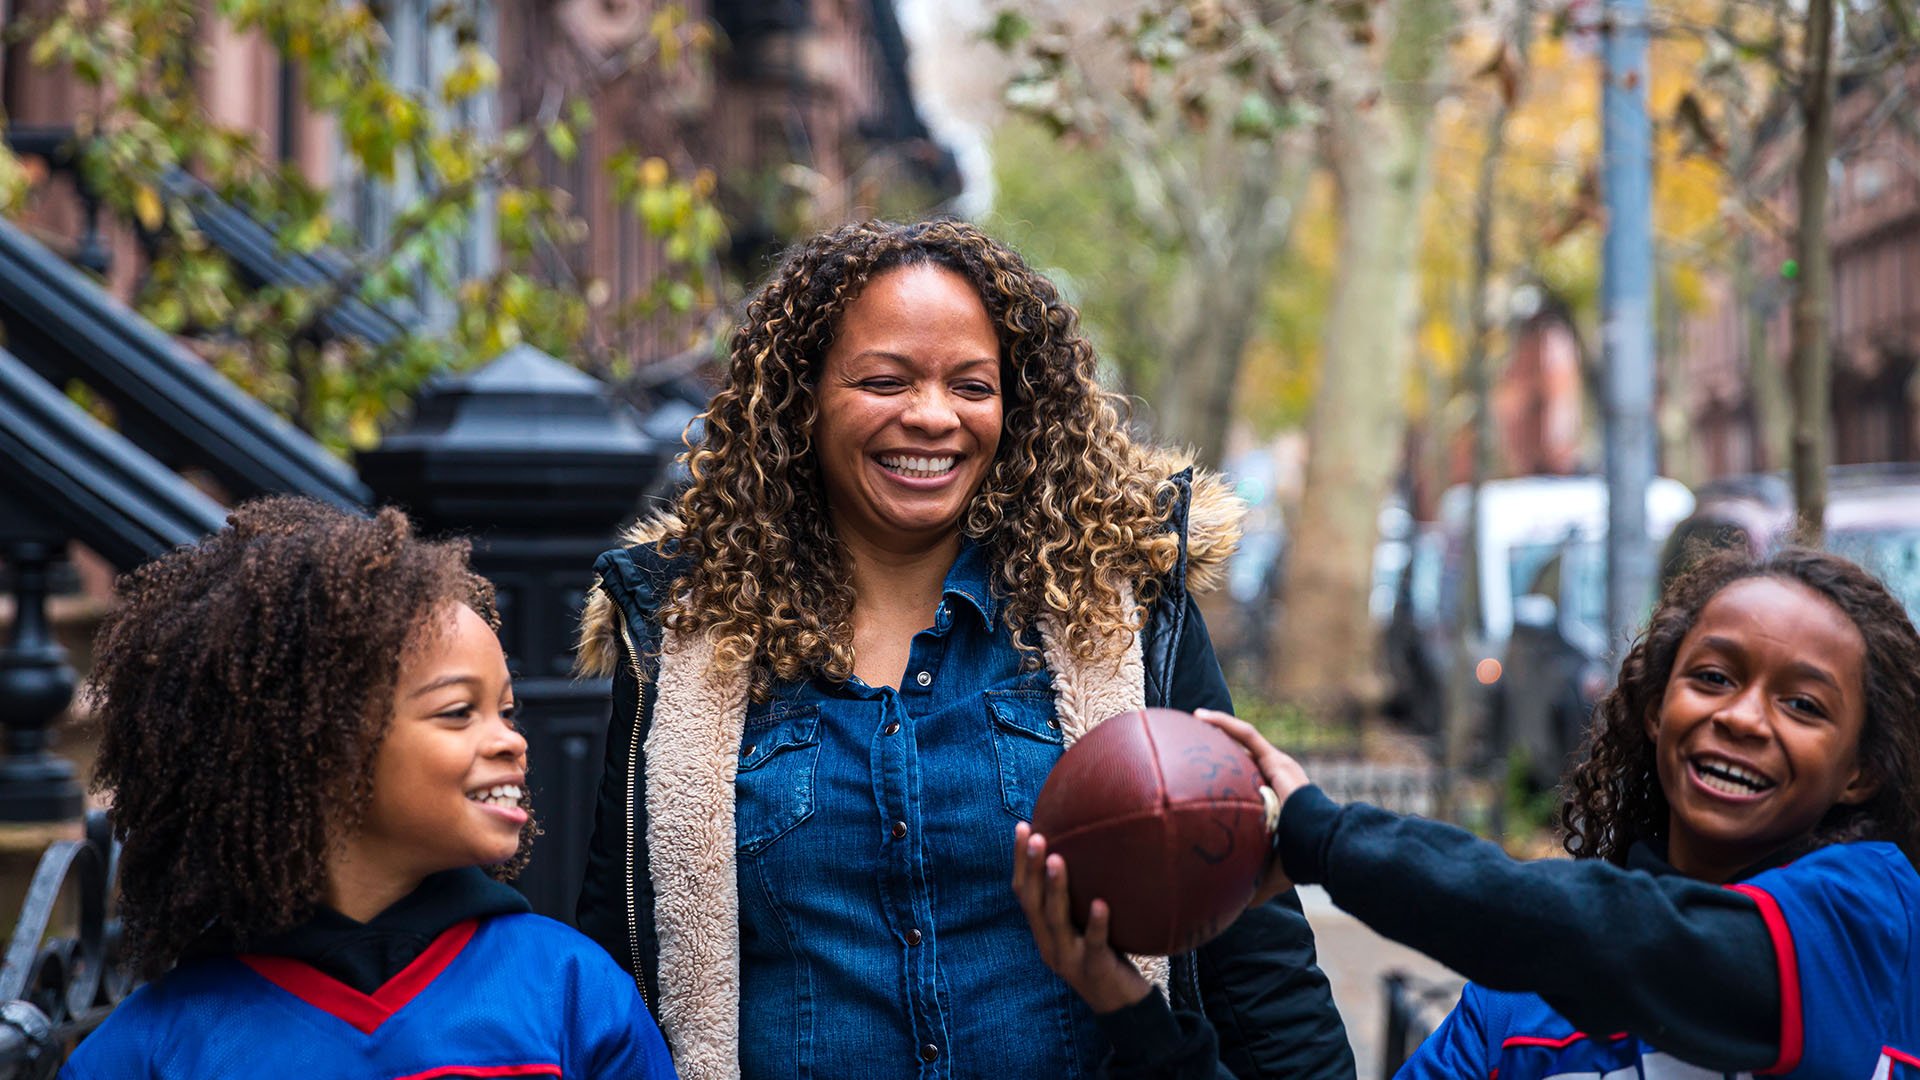 A mom and two daughters walk down a street in New York City; one is holding a football